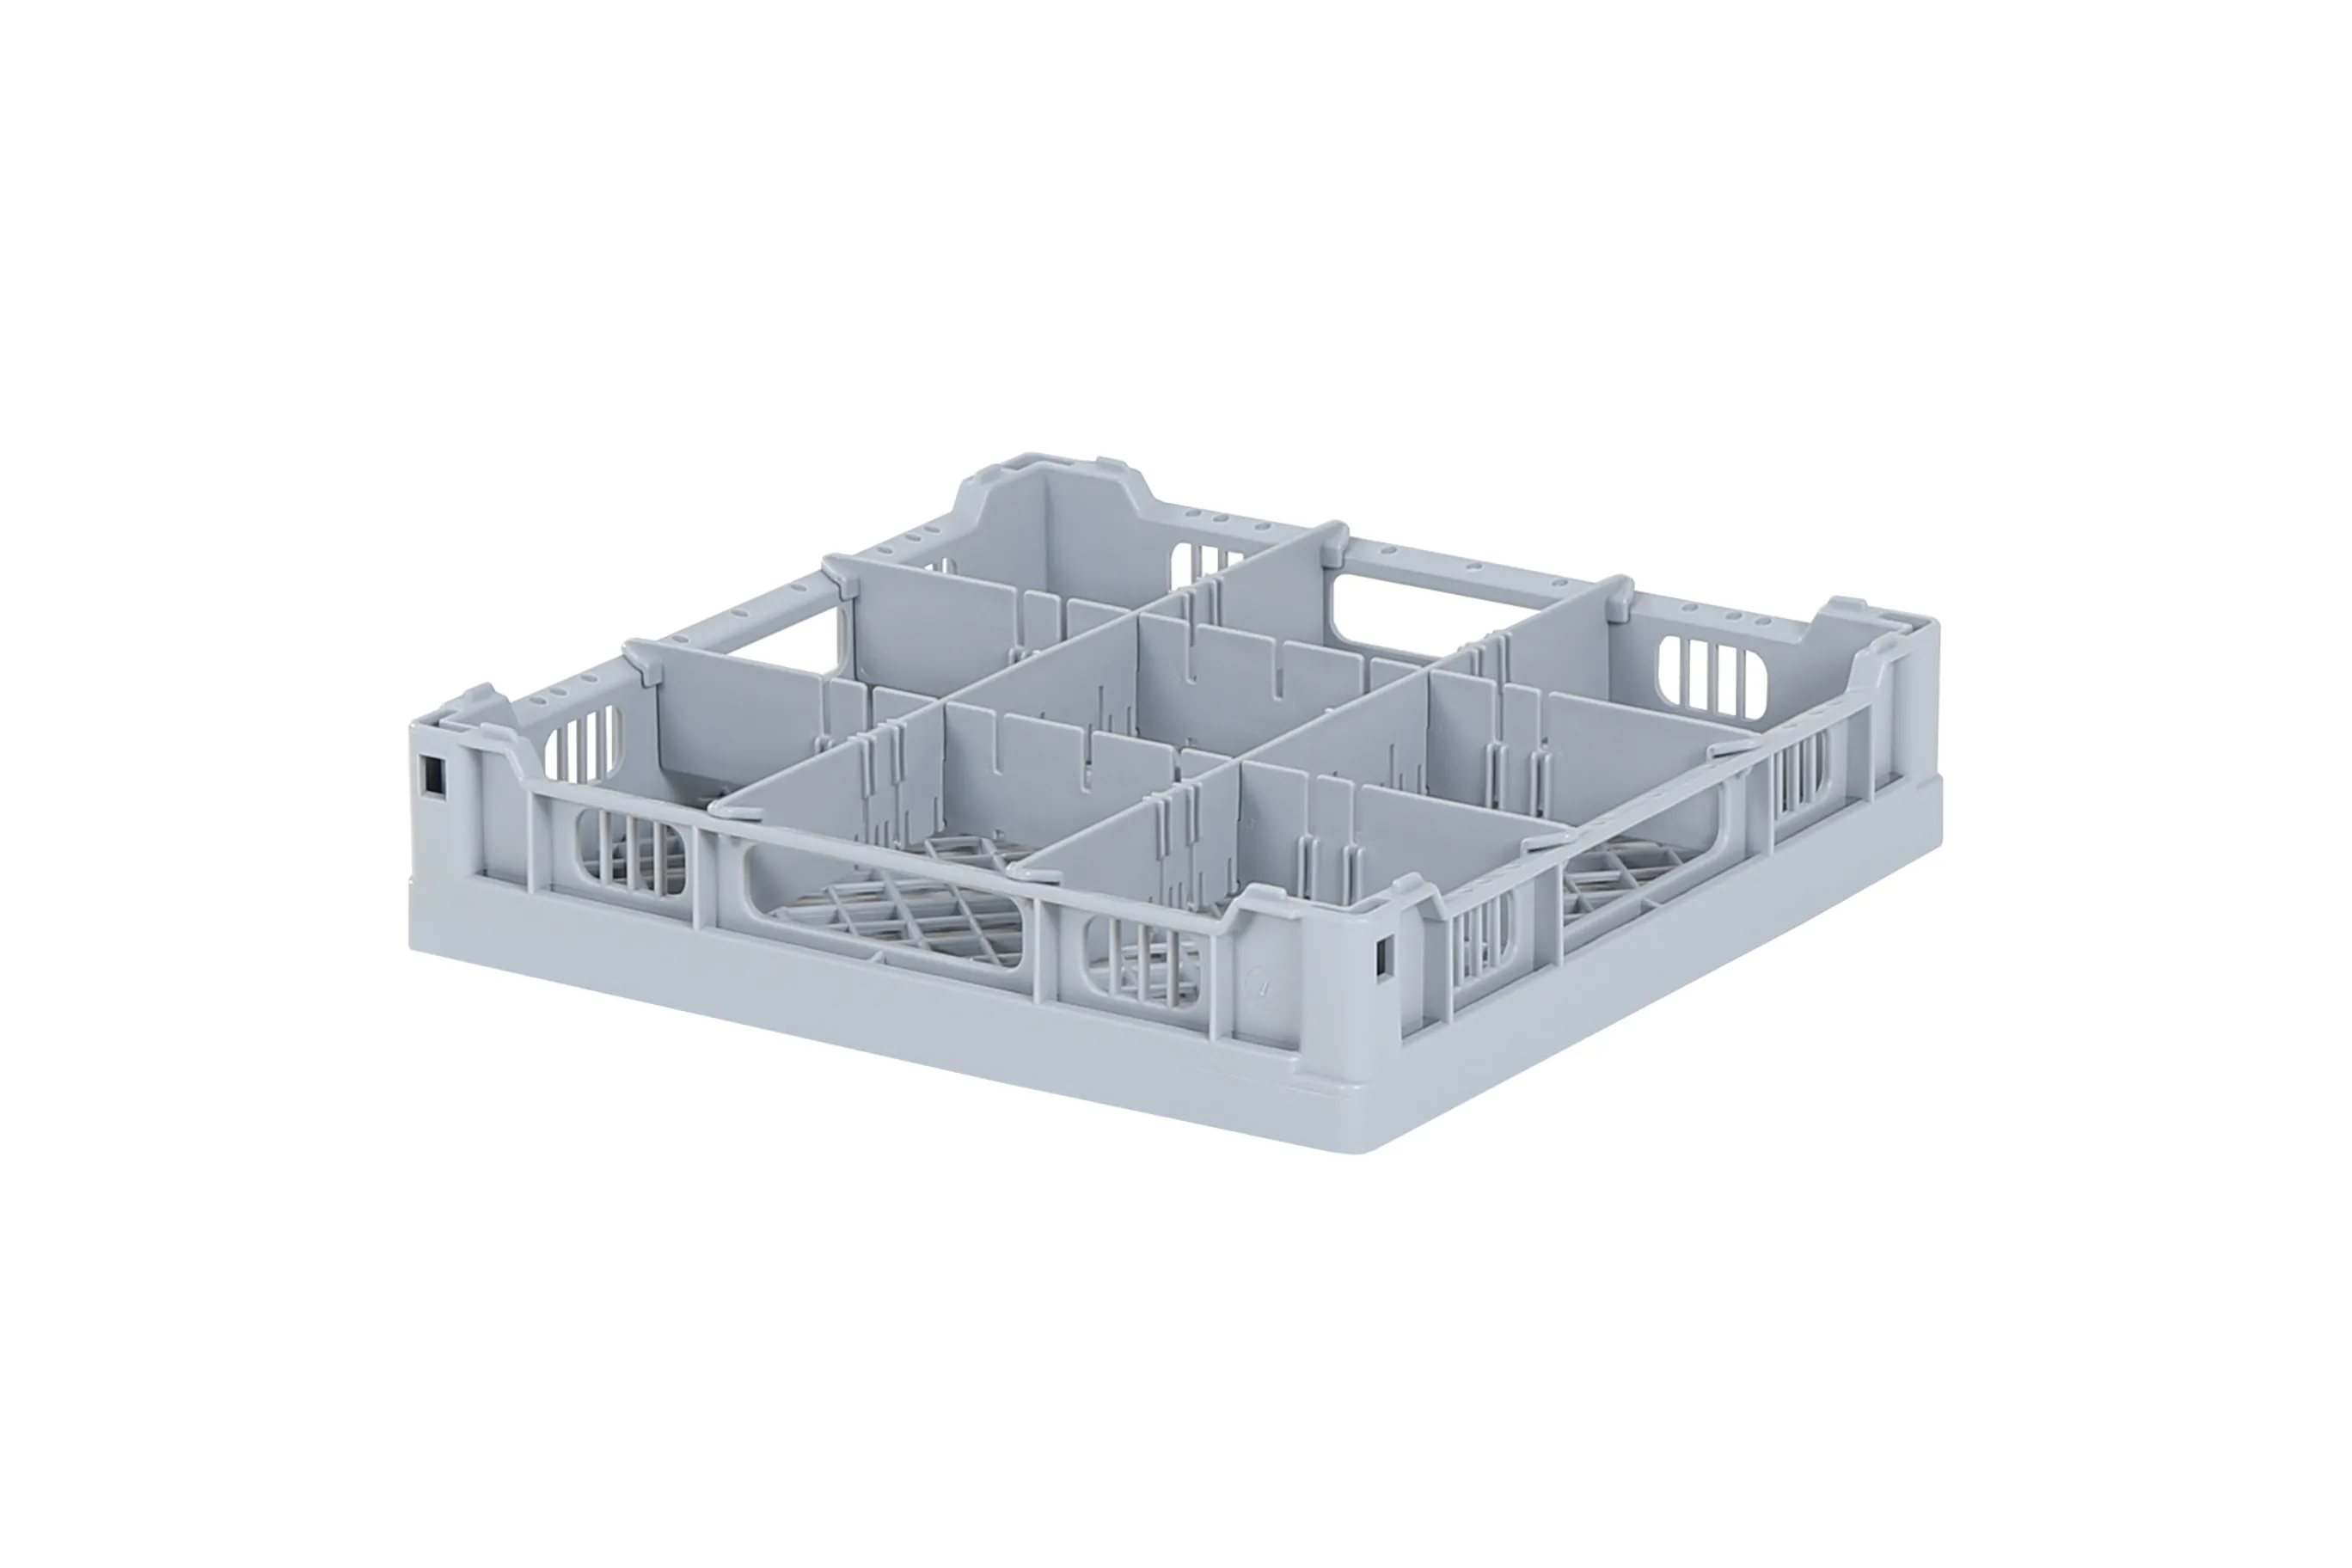 Dishwasher basket 400 x 400 mm - maximum glass height 65 mm - with 3 x 3 compartment division - maximum Ø of glass 115mm